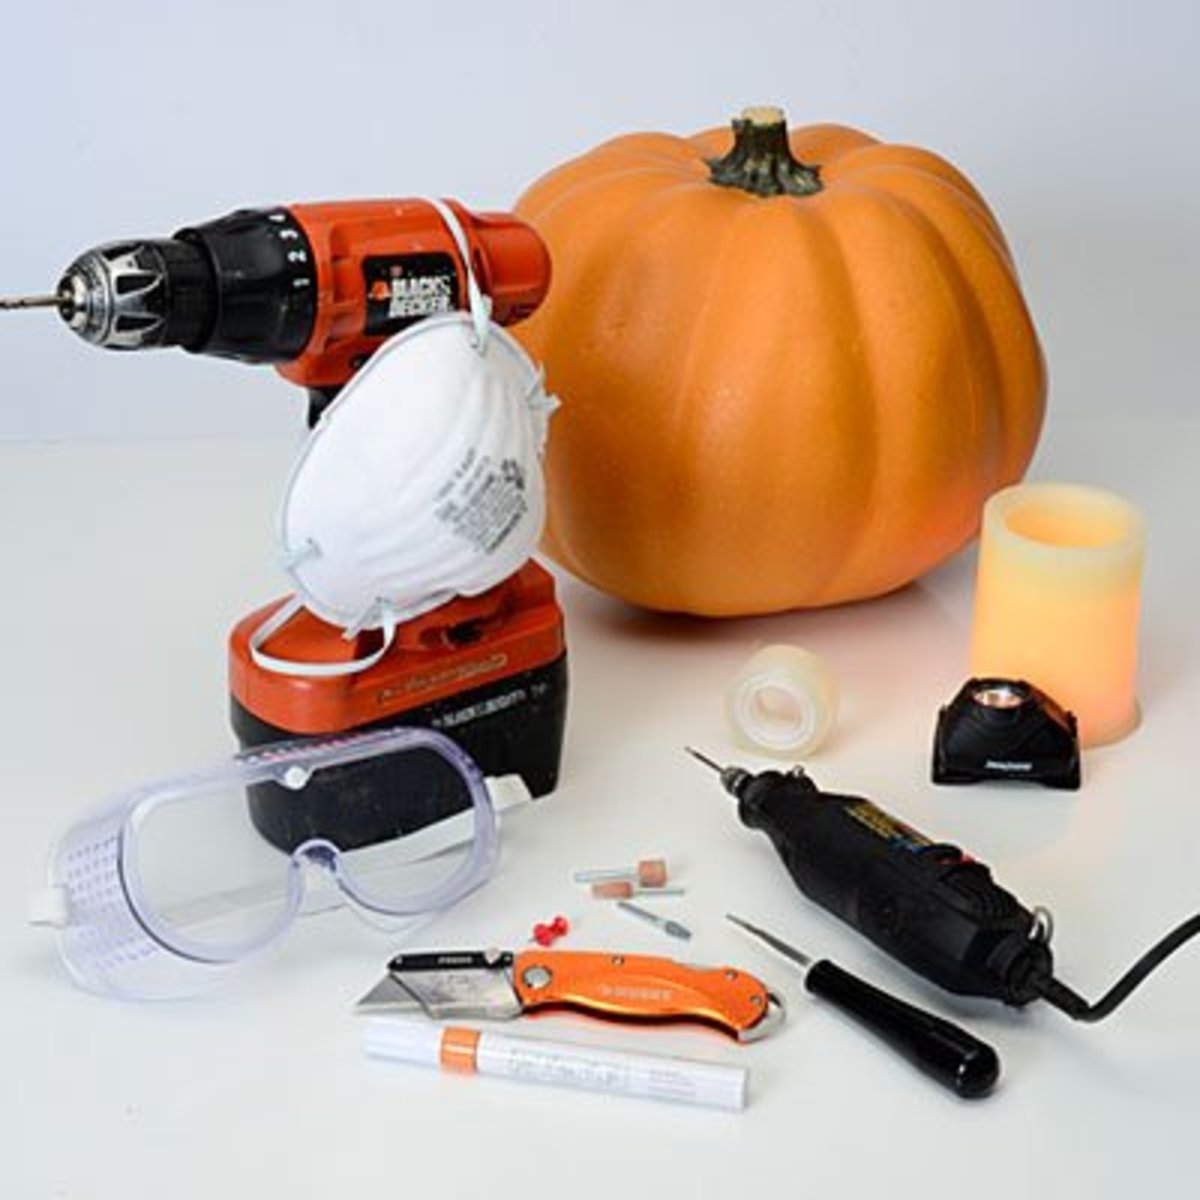 httppammorrishubpagescomhubthe-best-pumpkin-carving-tools-to-use-for-carving-pumpkins